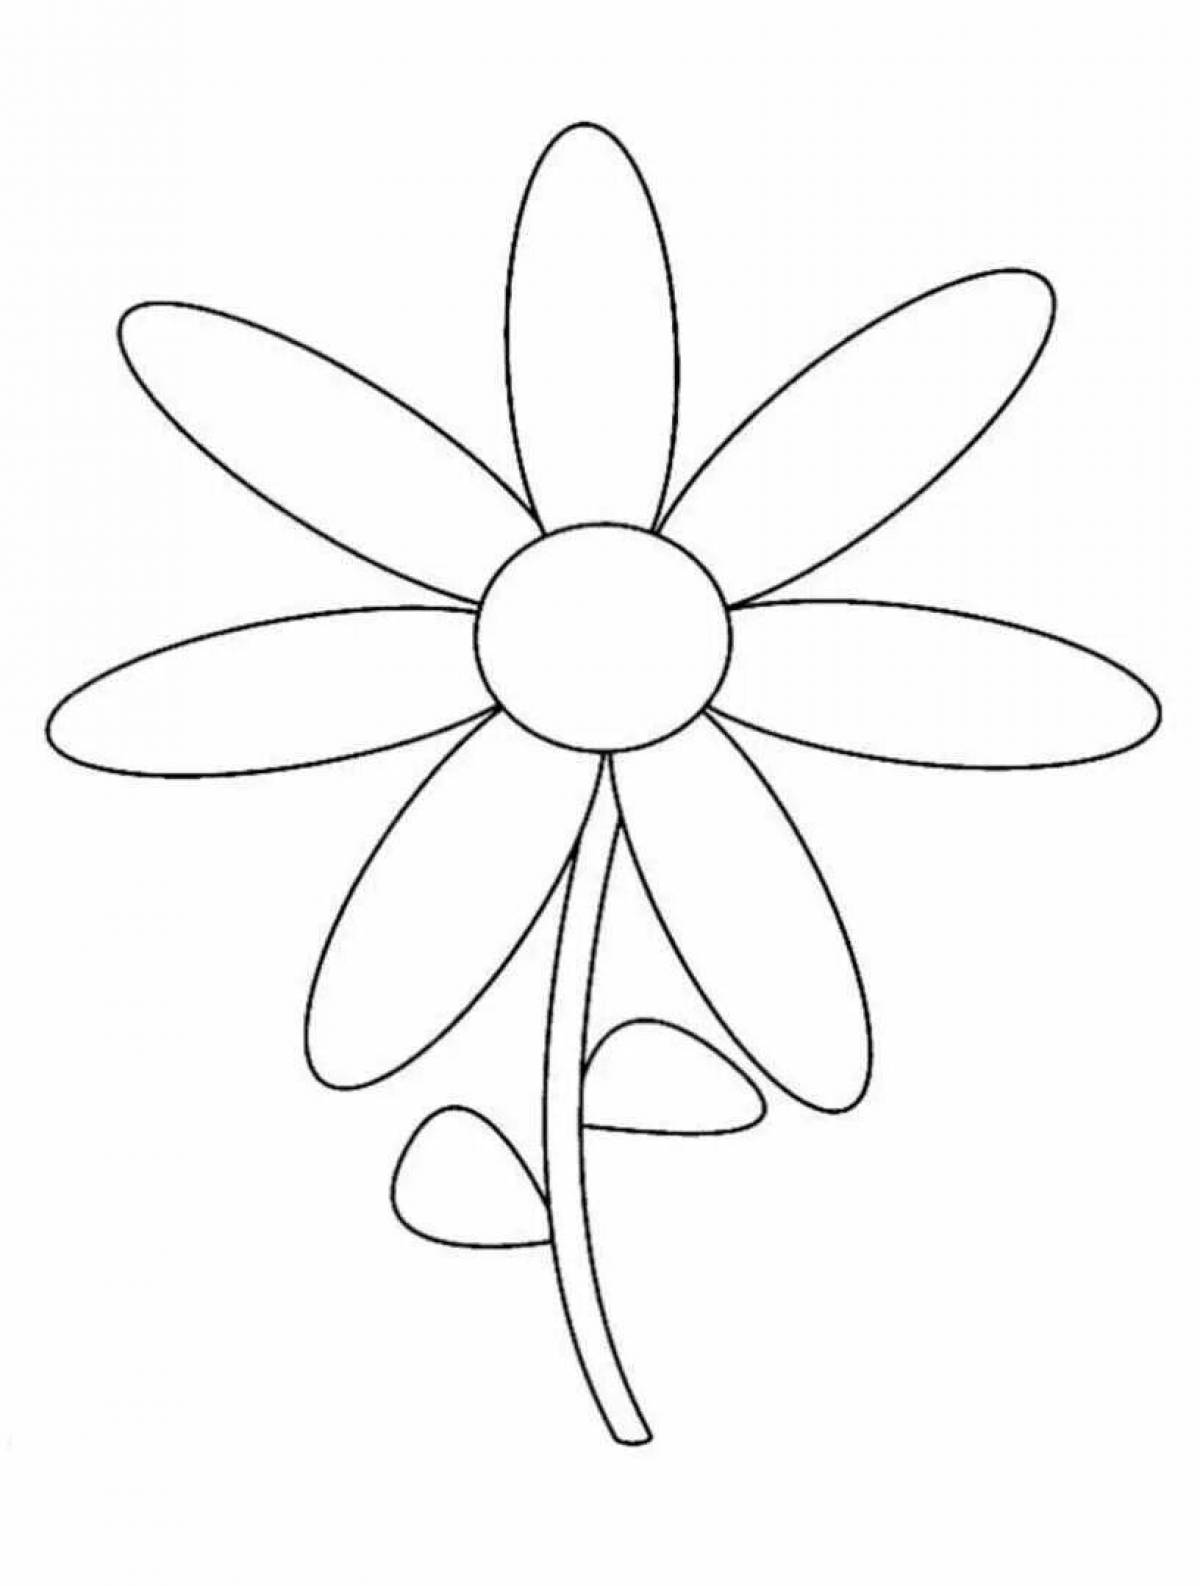 Luminous flower coloring book for children 3-4 years old